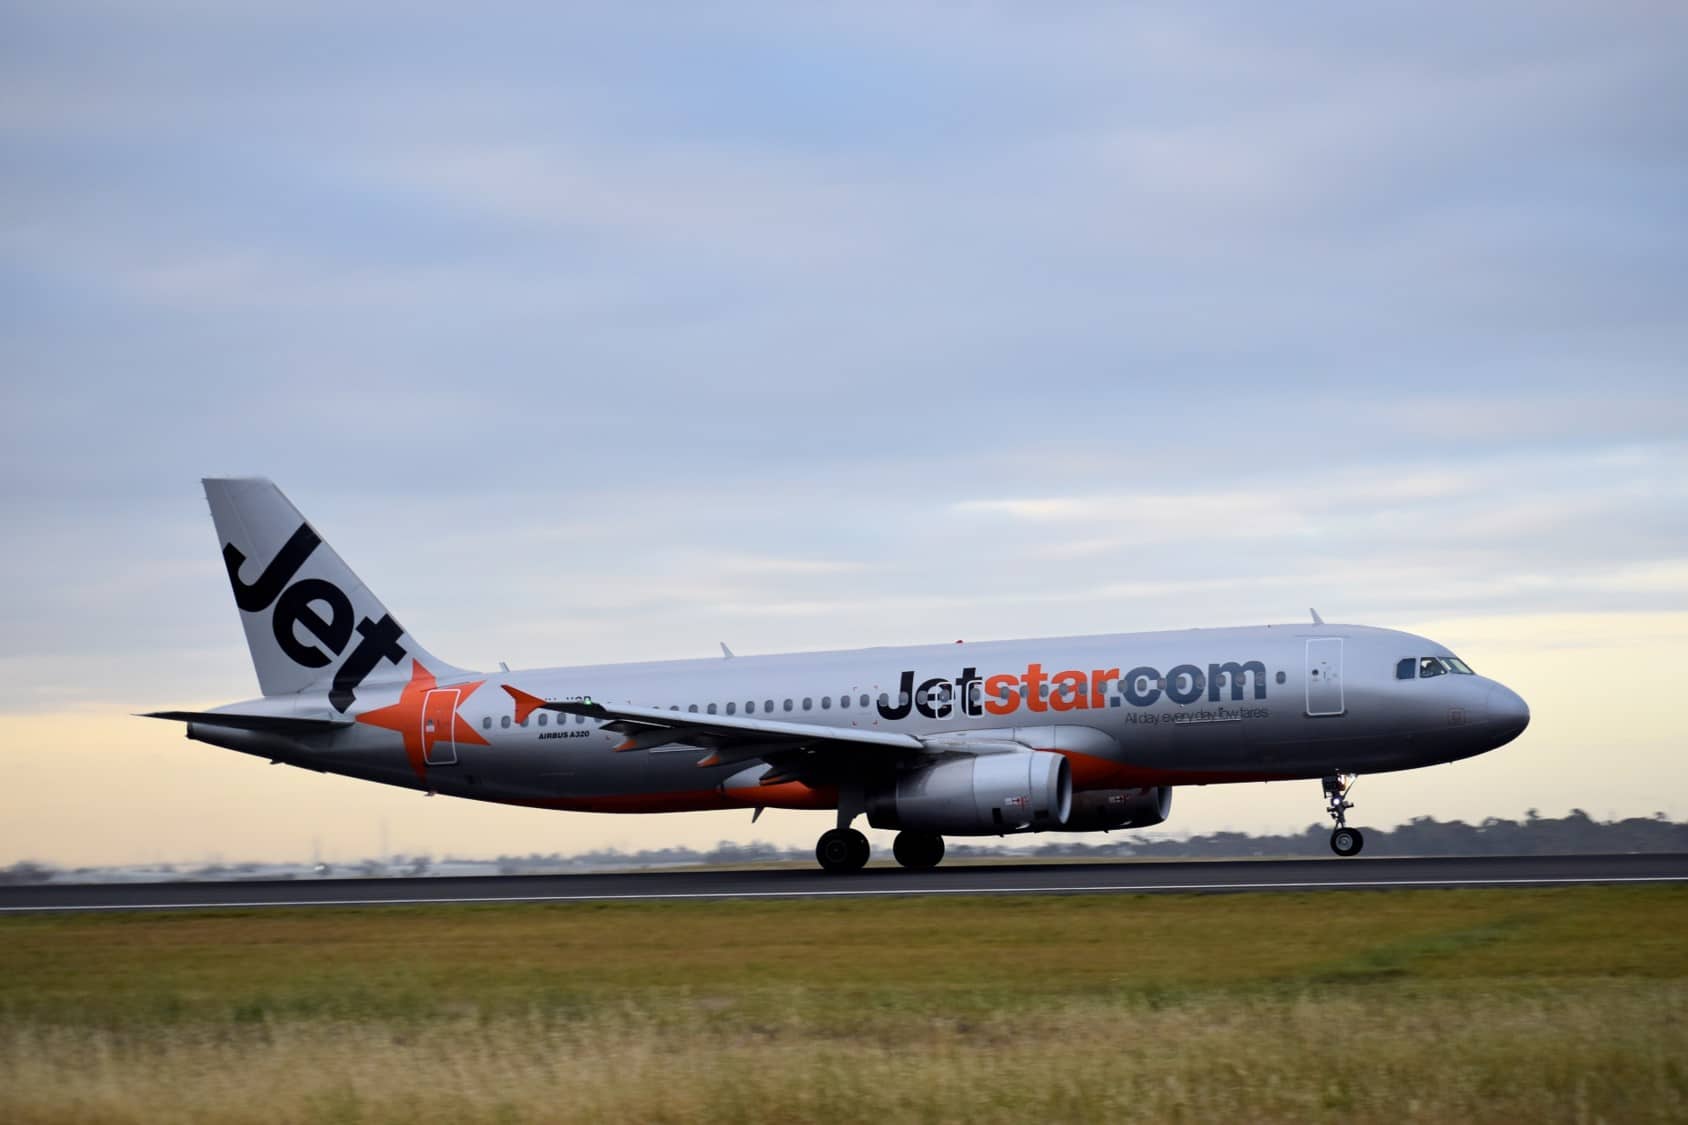 Jetstar Airbus A320 aircraft on the runway